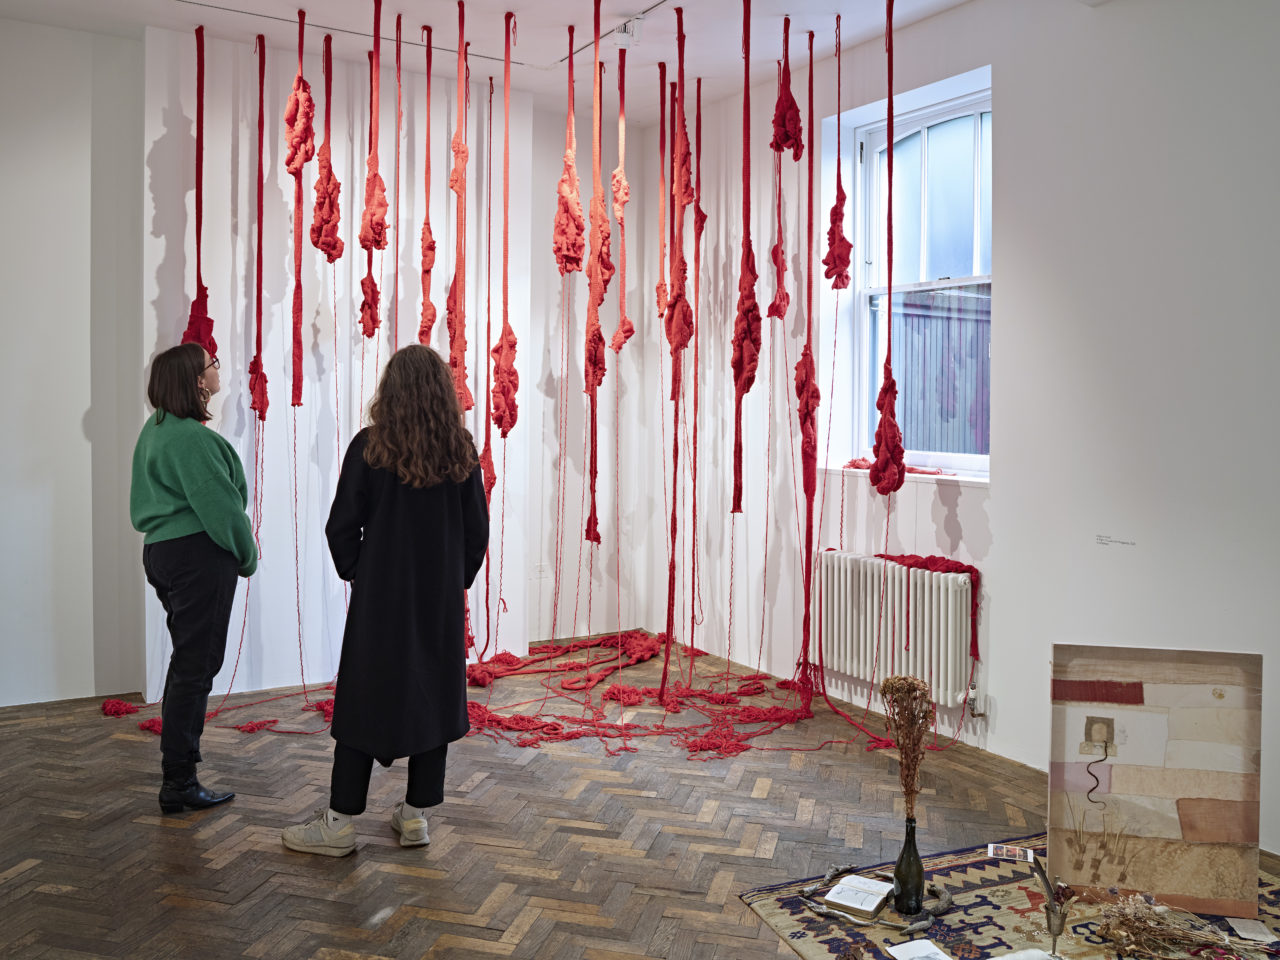 Bloomberg New Contemporaries 2022, Main Gallery. Installation photo by Andy Stagg.
